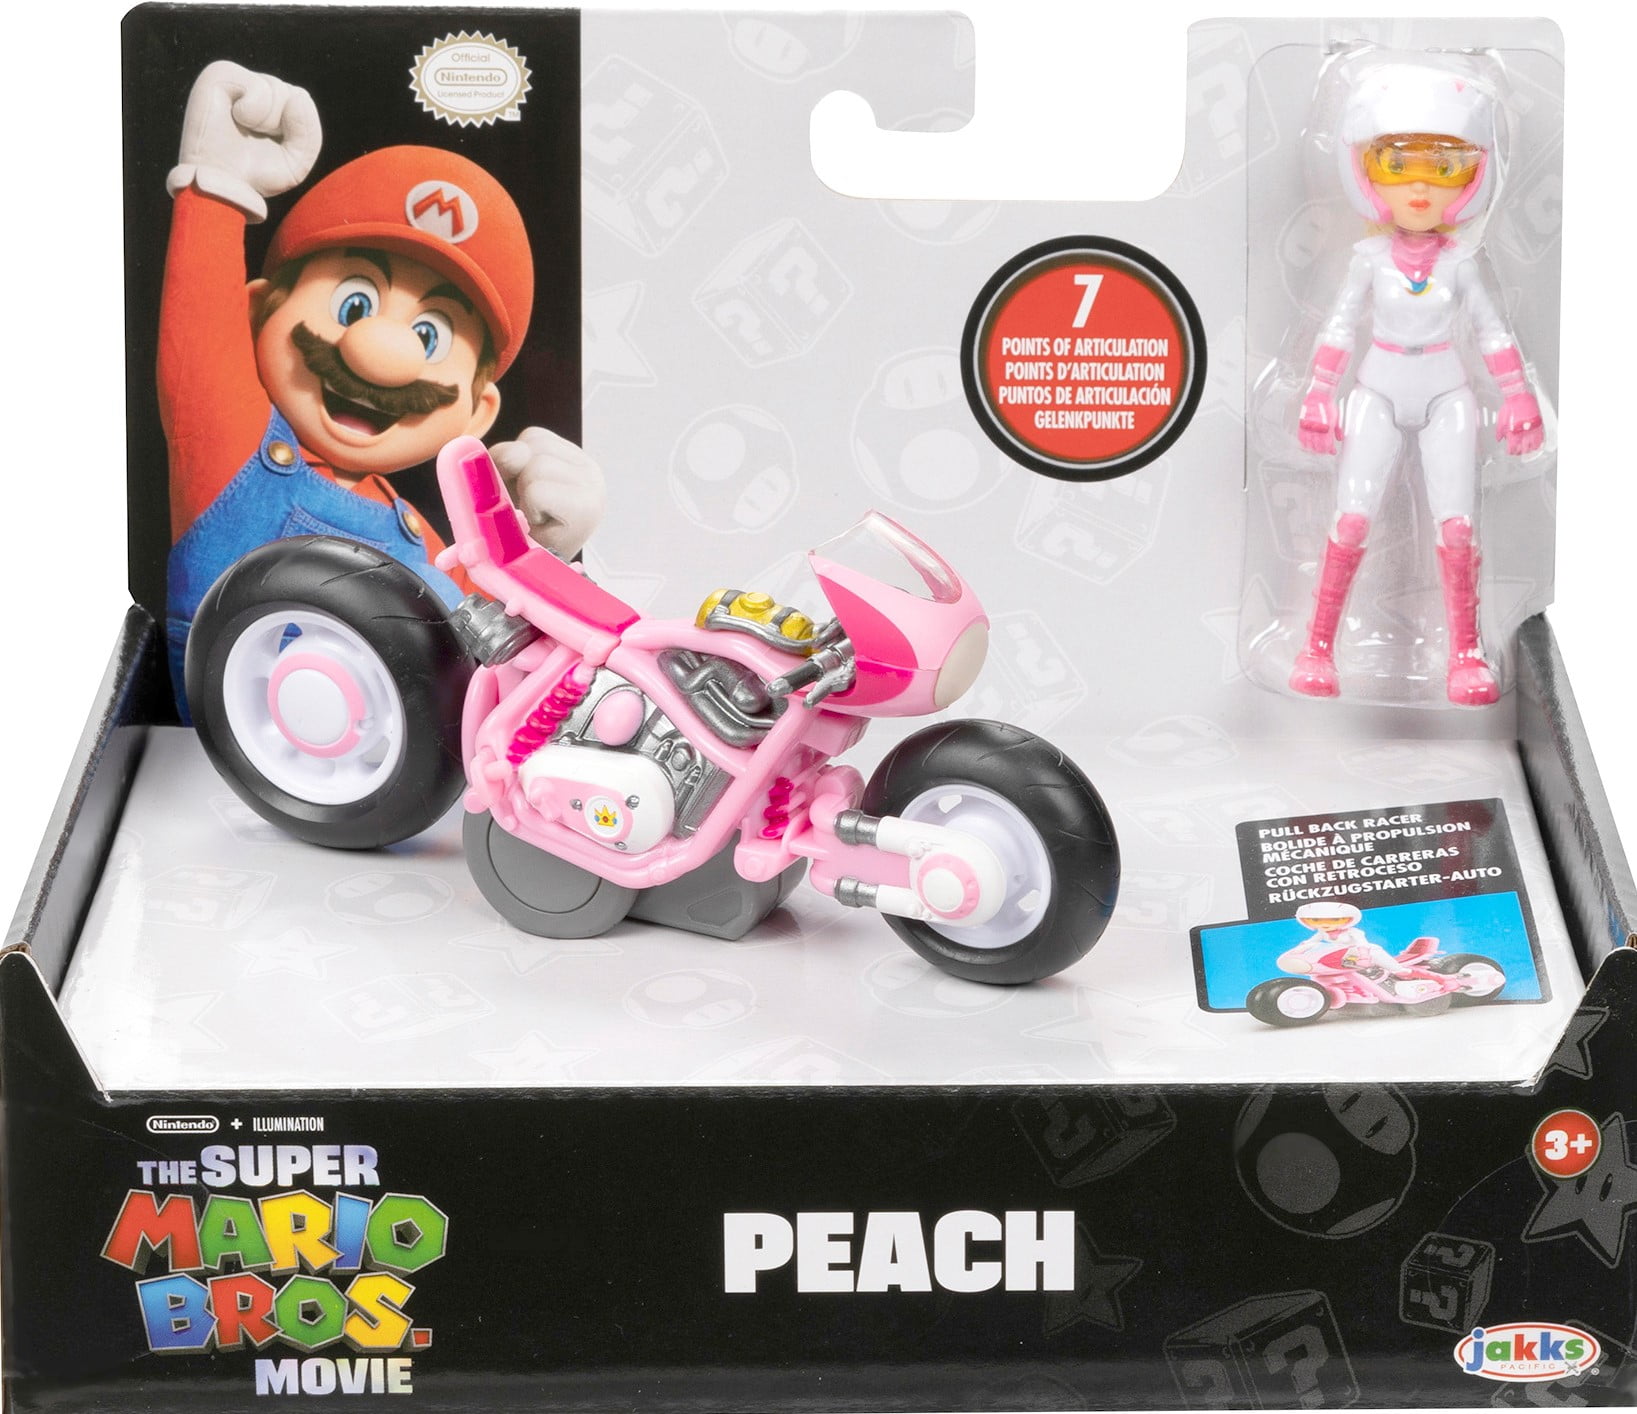 Can 'Peaches, Peaches, Peaches' from Super Mario Make It to the